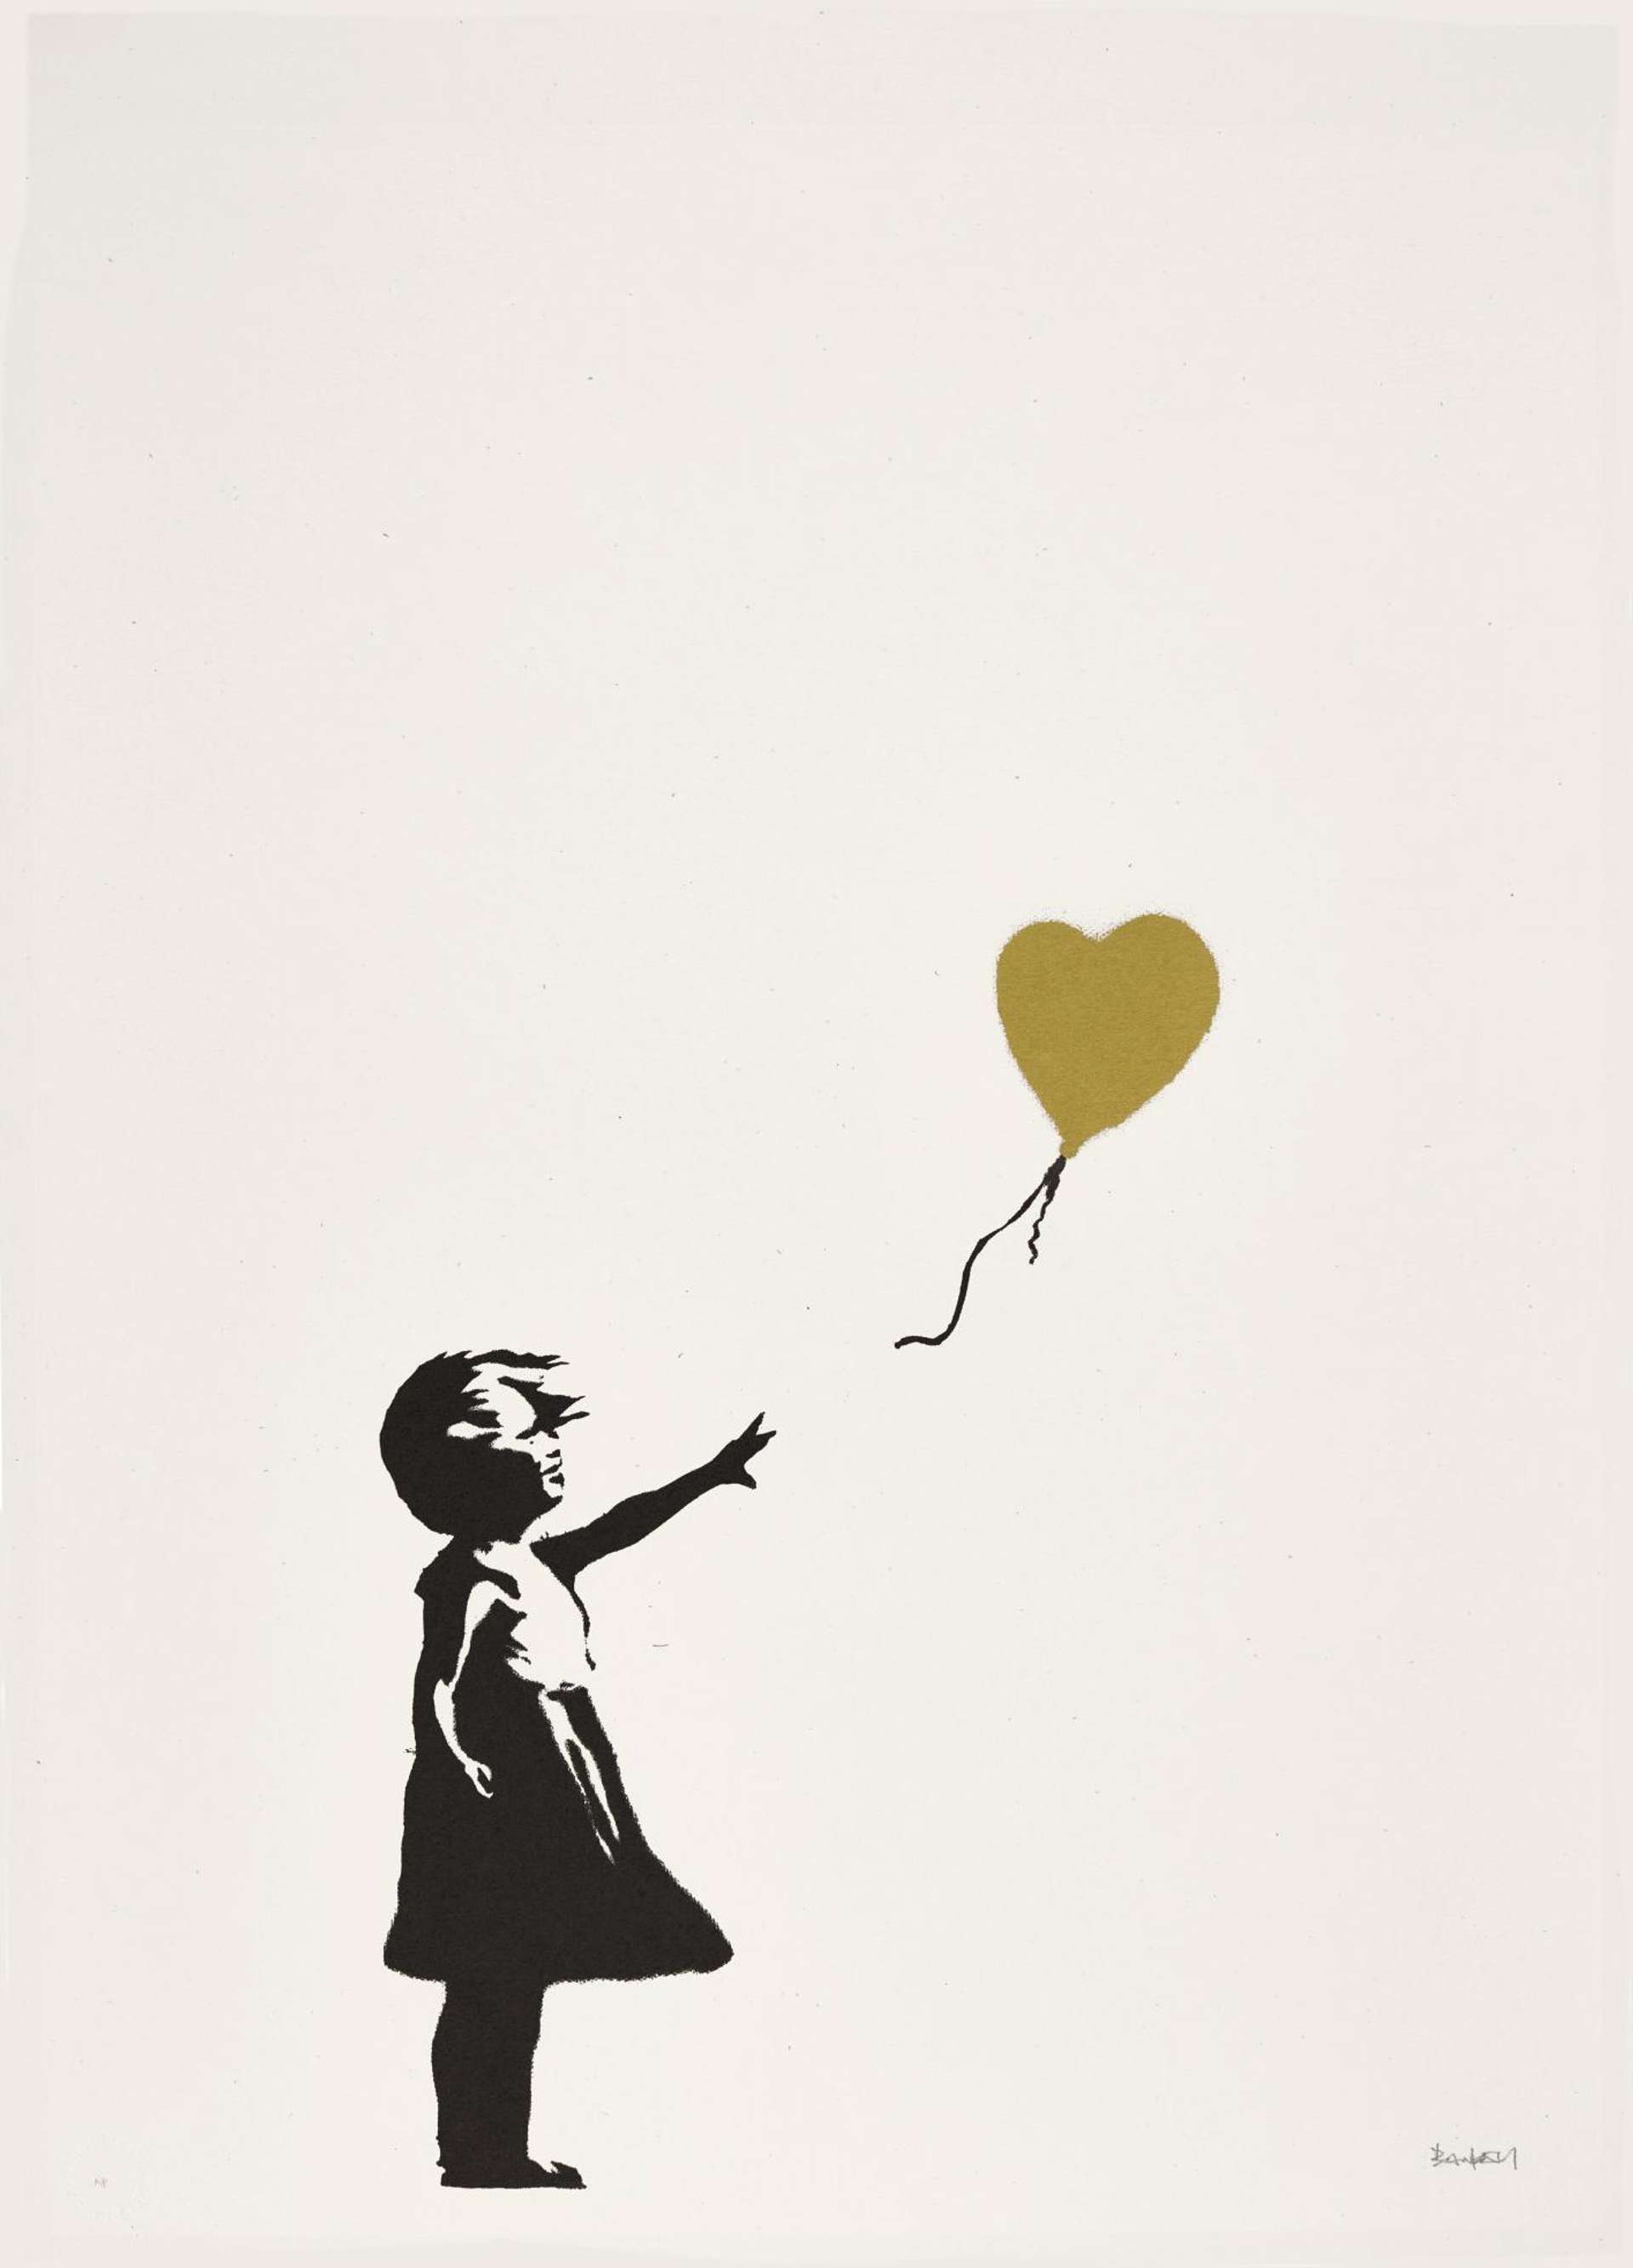 A screenprint by Banksy depicting a young girl in black paint reaching for a gold heart-shaped balloon